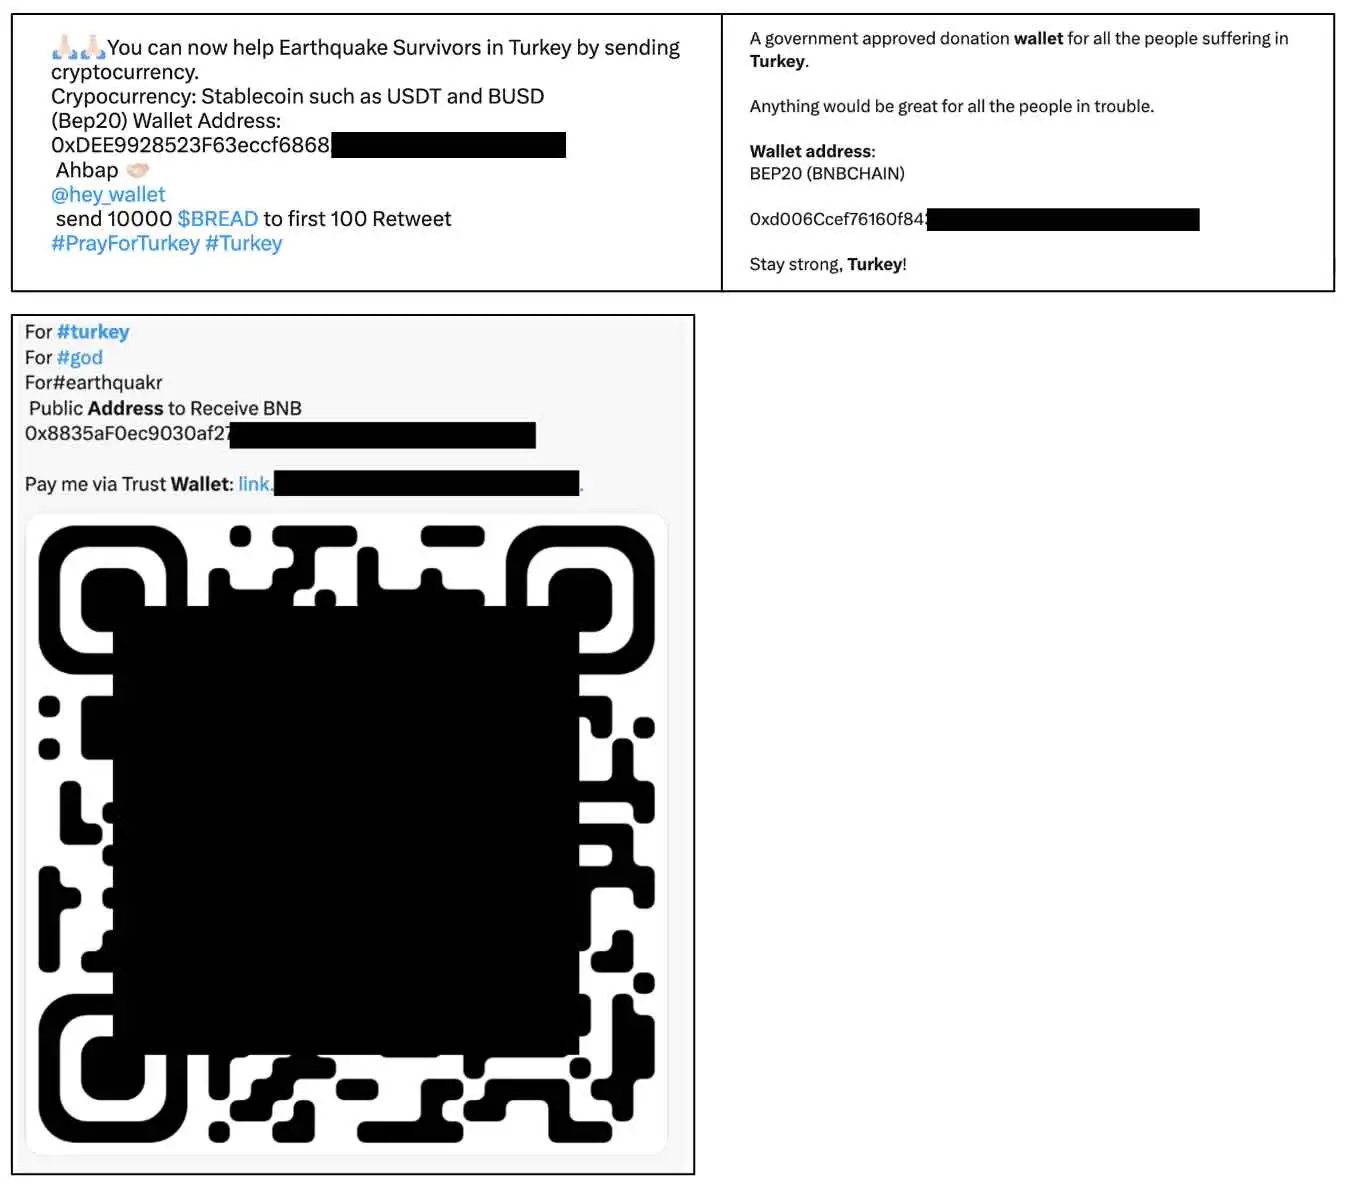 Fake donation scam by sending QR code -malicious posts on social media for earthquake relief scam